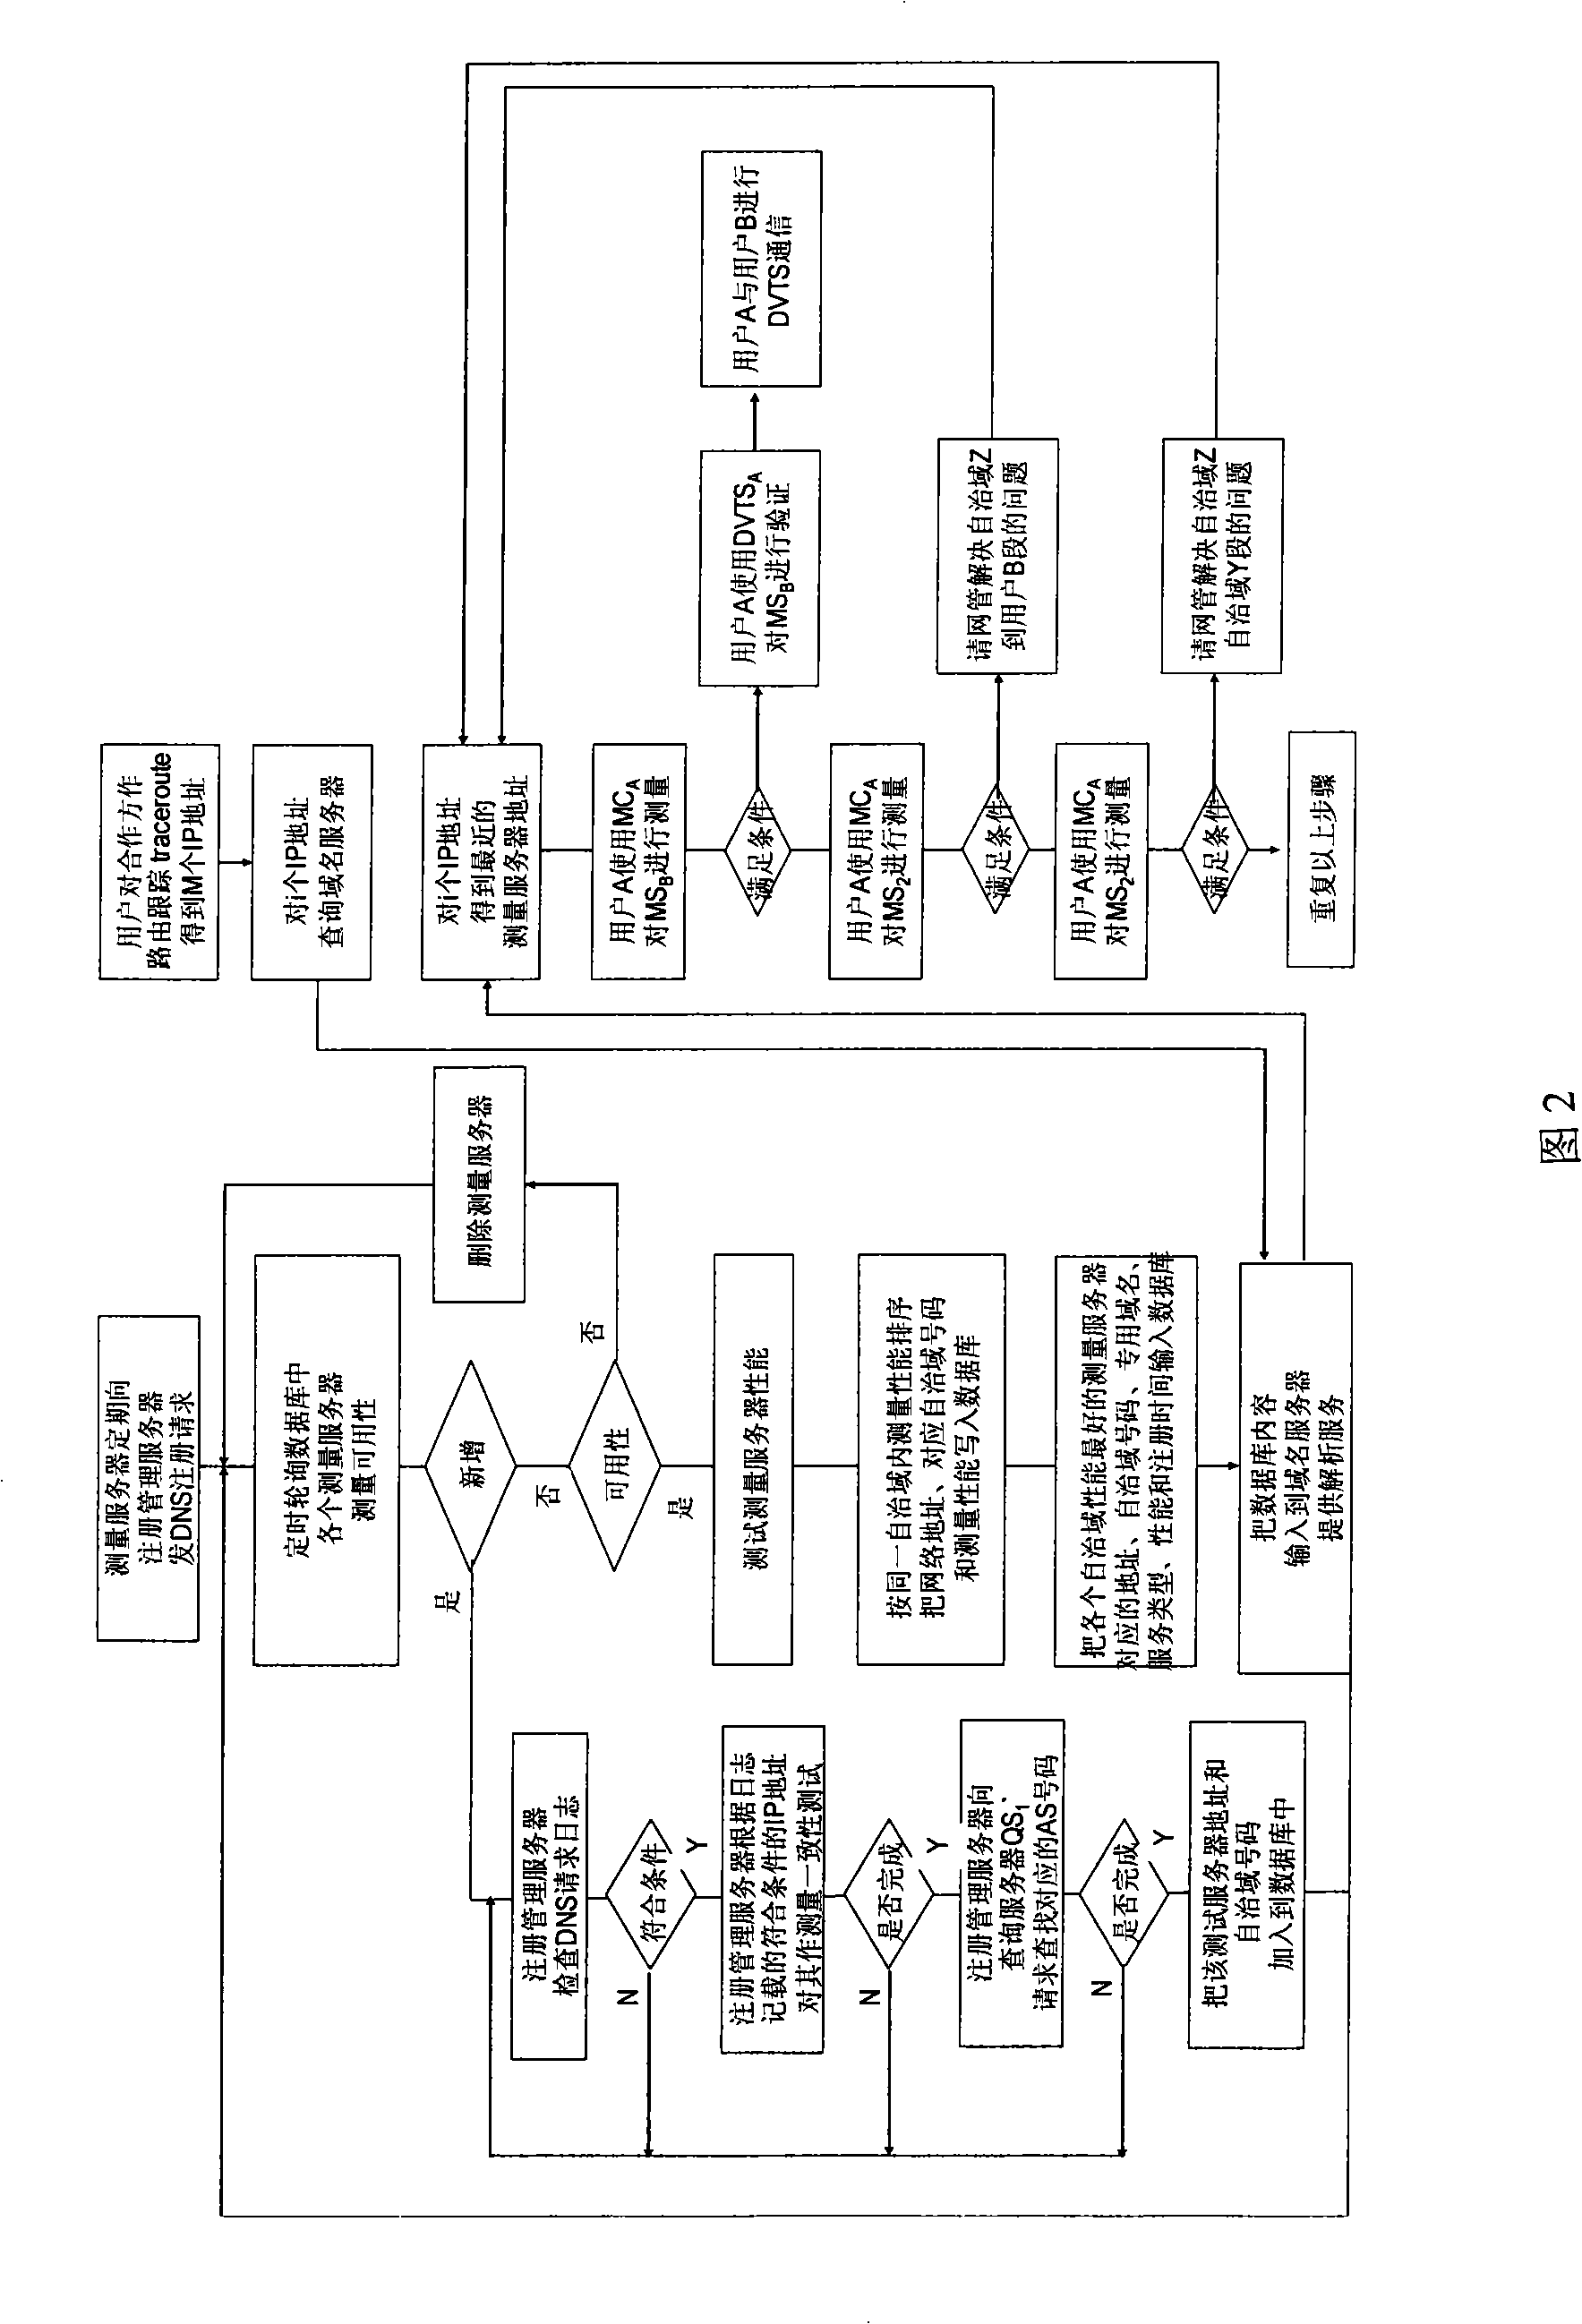 Method for measuring network application performance supporting internet high bandwidth real time video application